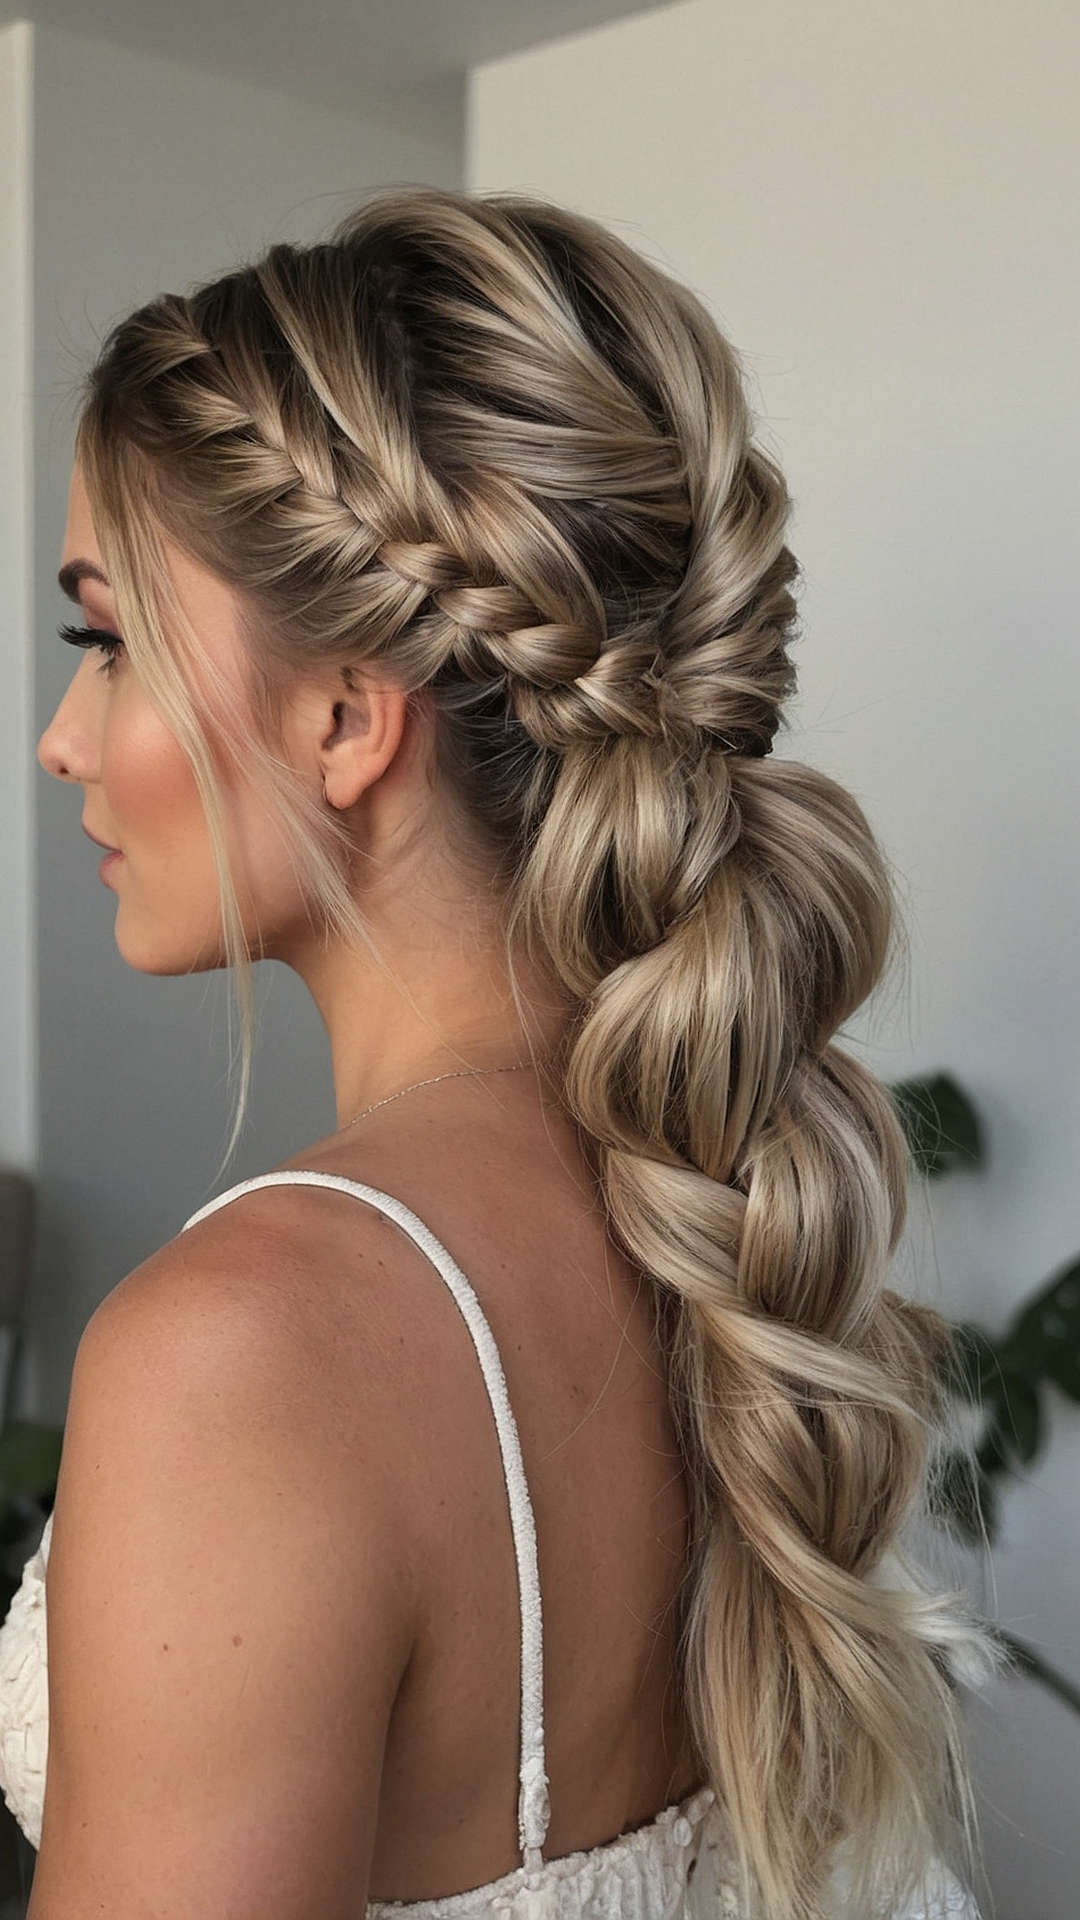 Hairstyle Heaven: Gorgeous Braided Looks